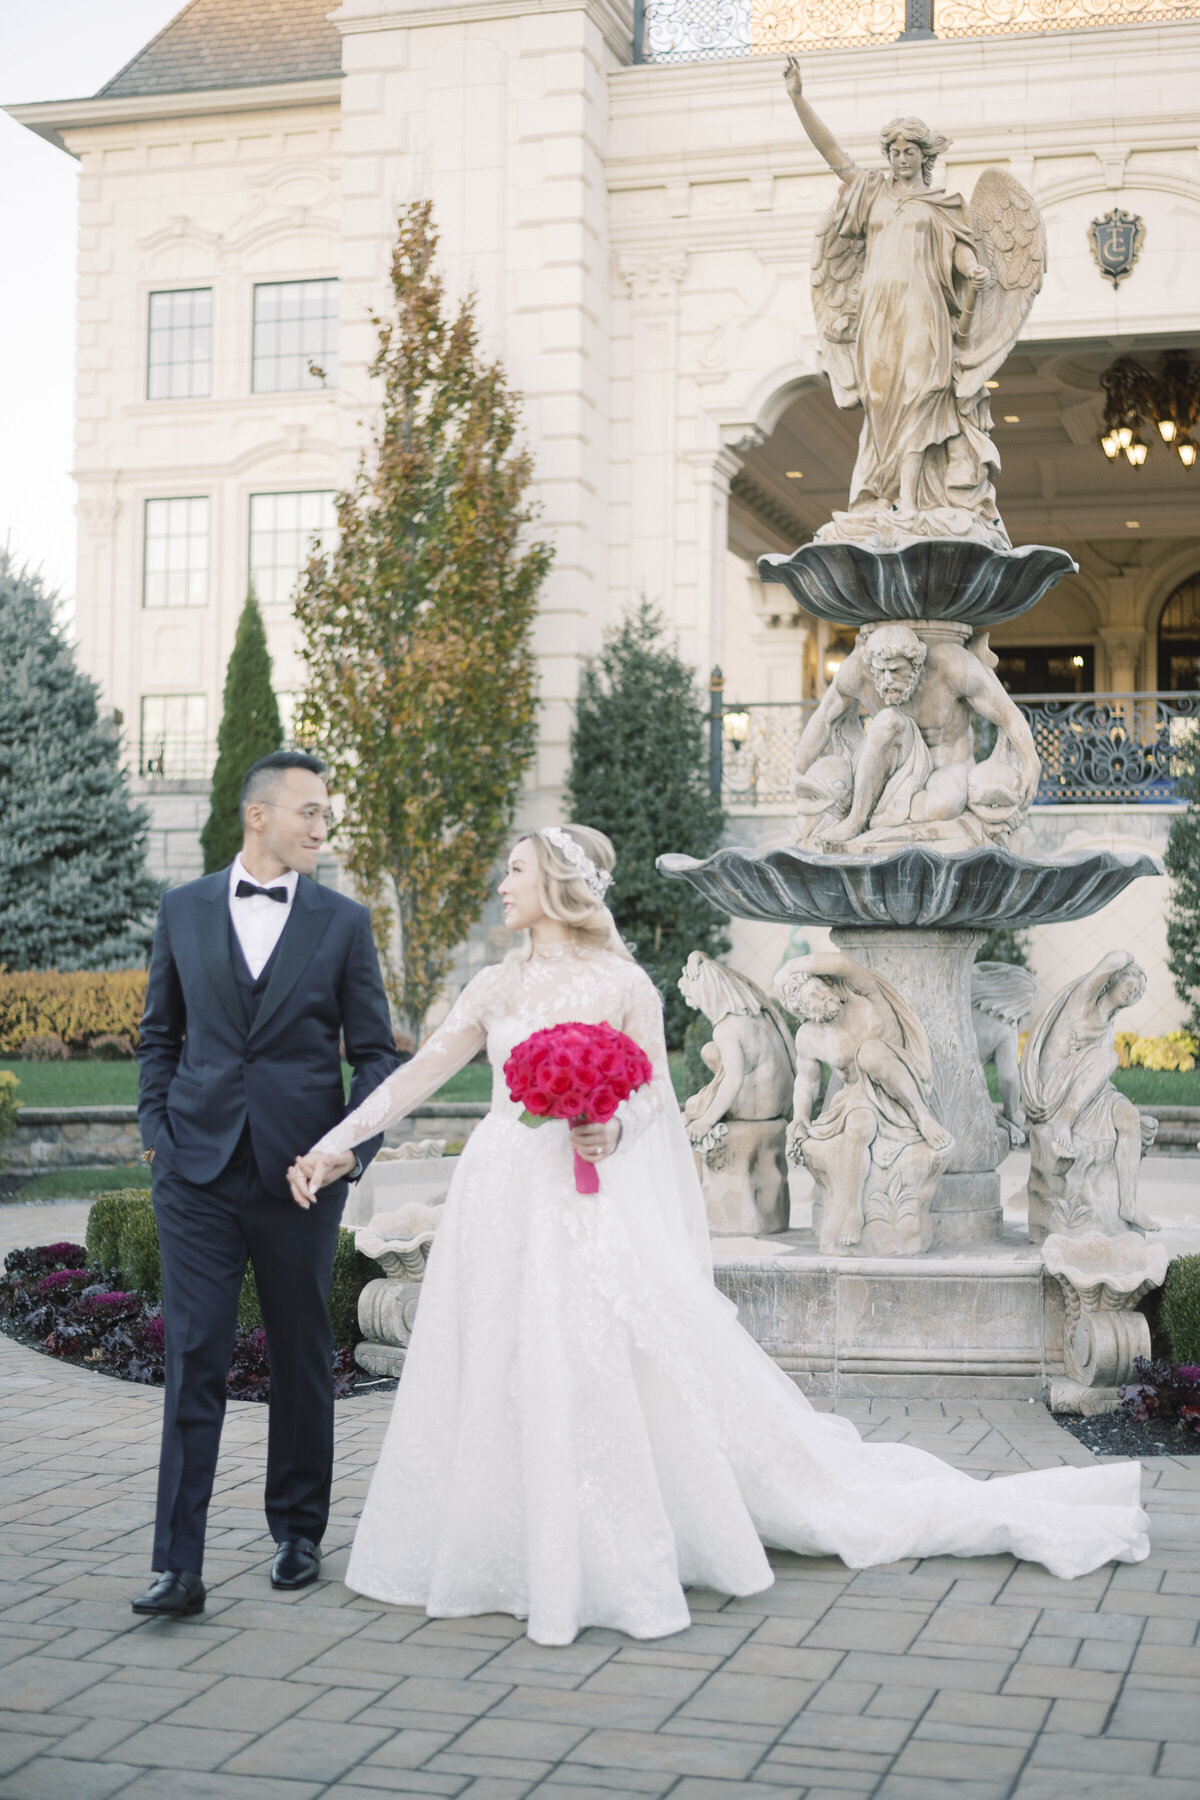 Michelle-Behre-Photography-Yvonne-and-Louis-Legacy-Castle-NJ-Wedding-Photographer-107